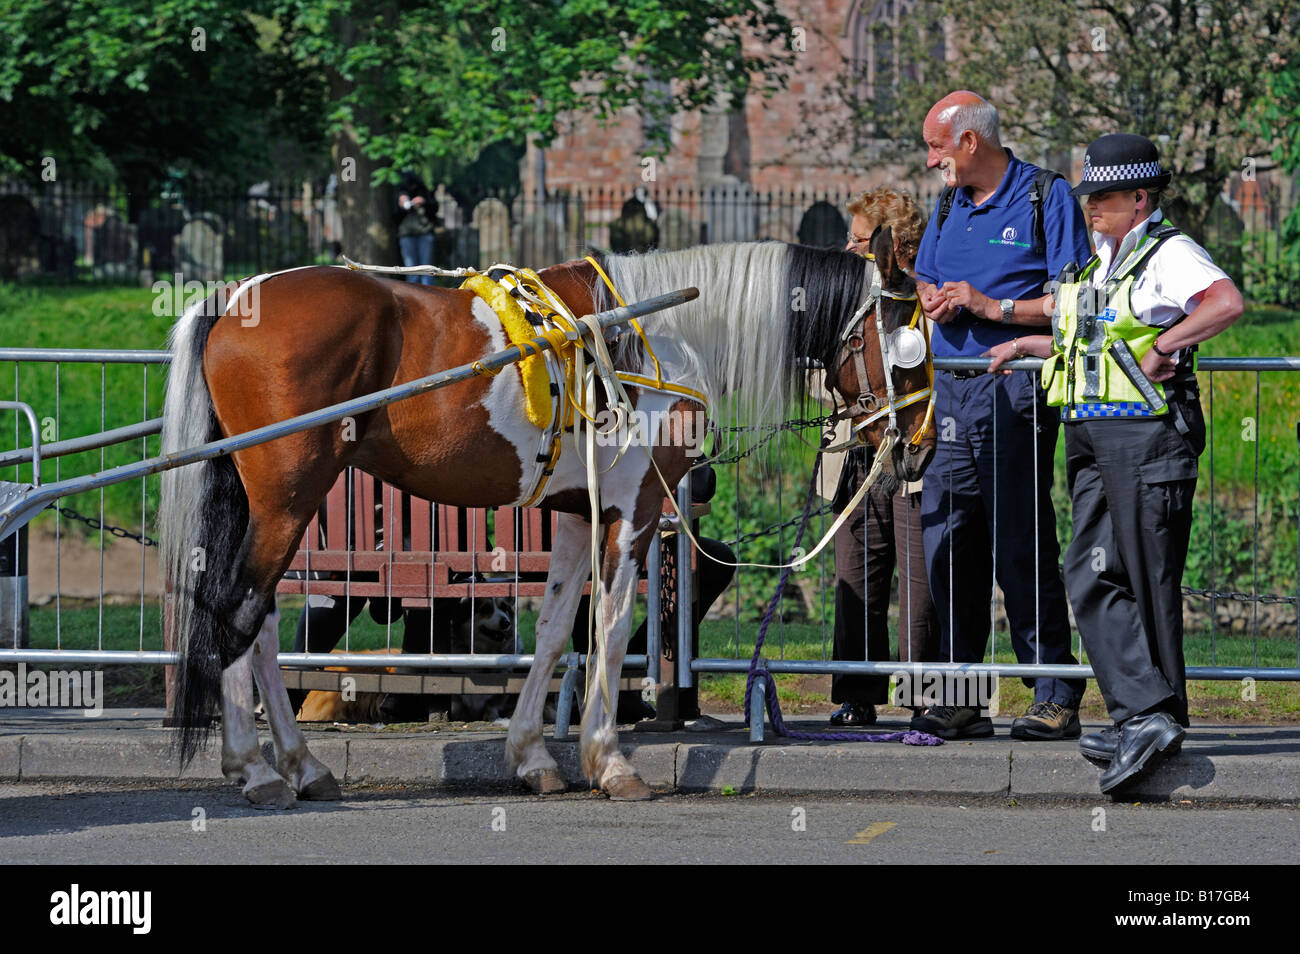 Police and public concern at condition of a horse. Appleby Horse Fair. Appleby-in-Westmorland, Cumbria, England, United Kingdom. Stock Photo